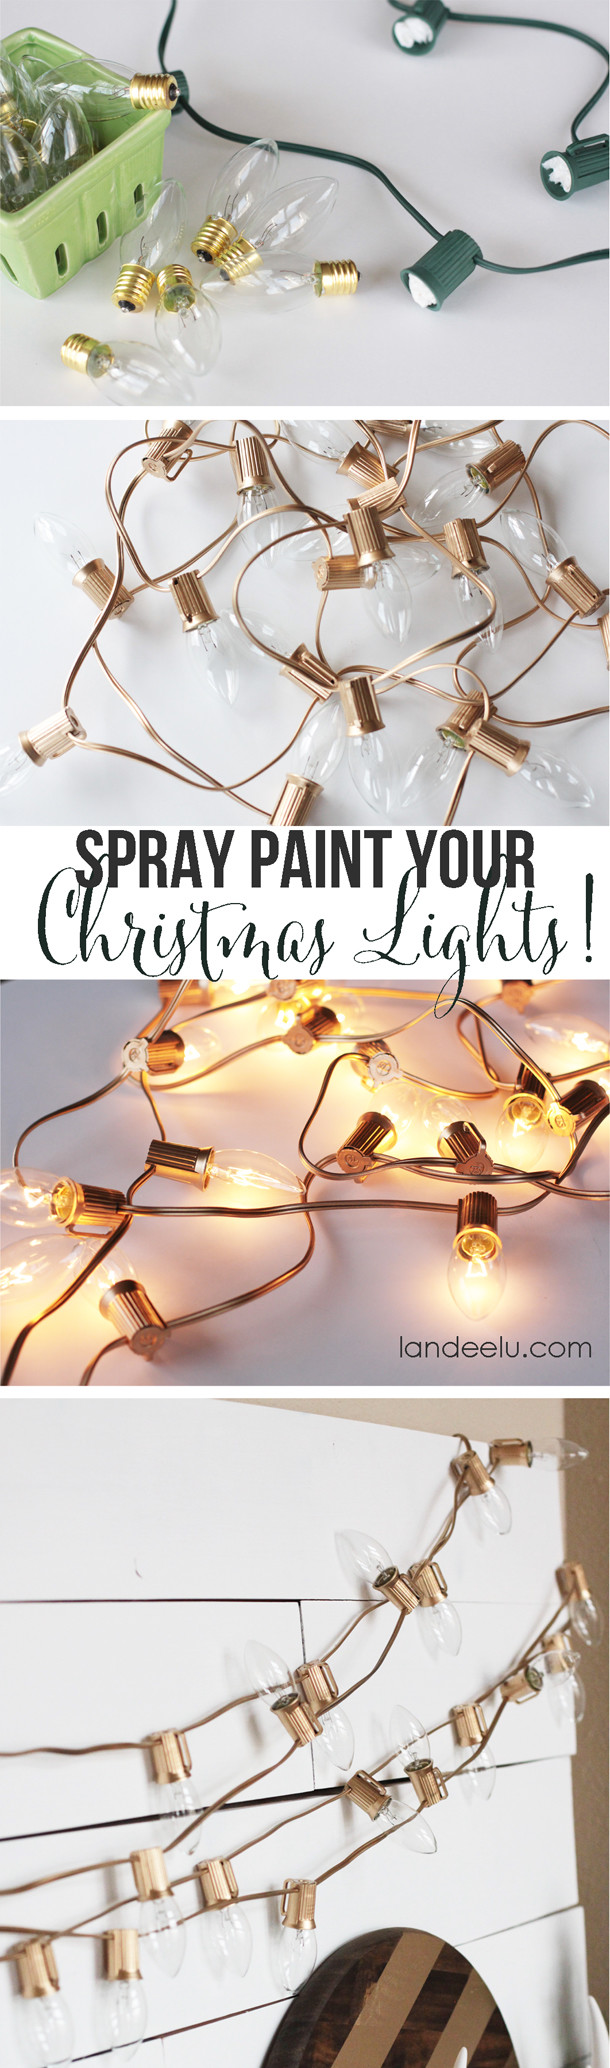 Really make things regal with these beautifully <a href="http://www.landeeseelandeedo.com/2014/12/gold-christmas-decor-mantel-details.html" target="_blank">updated lights</a>.